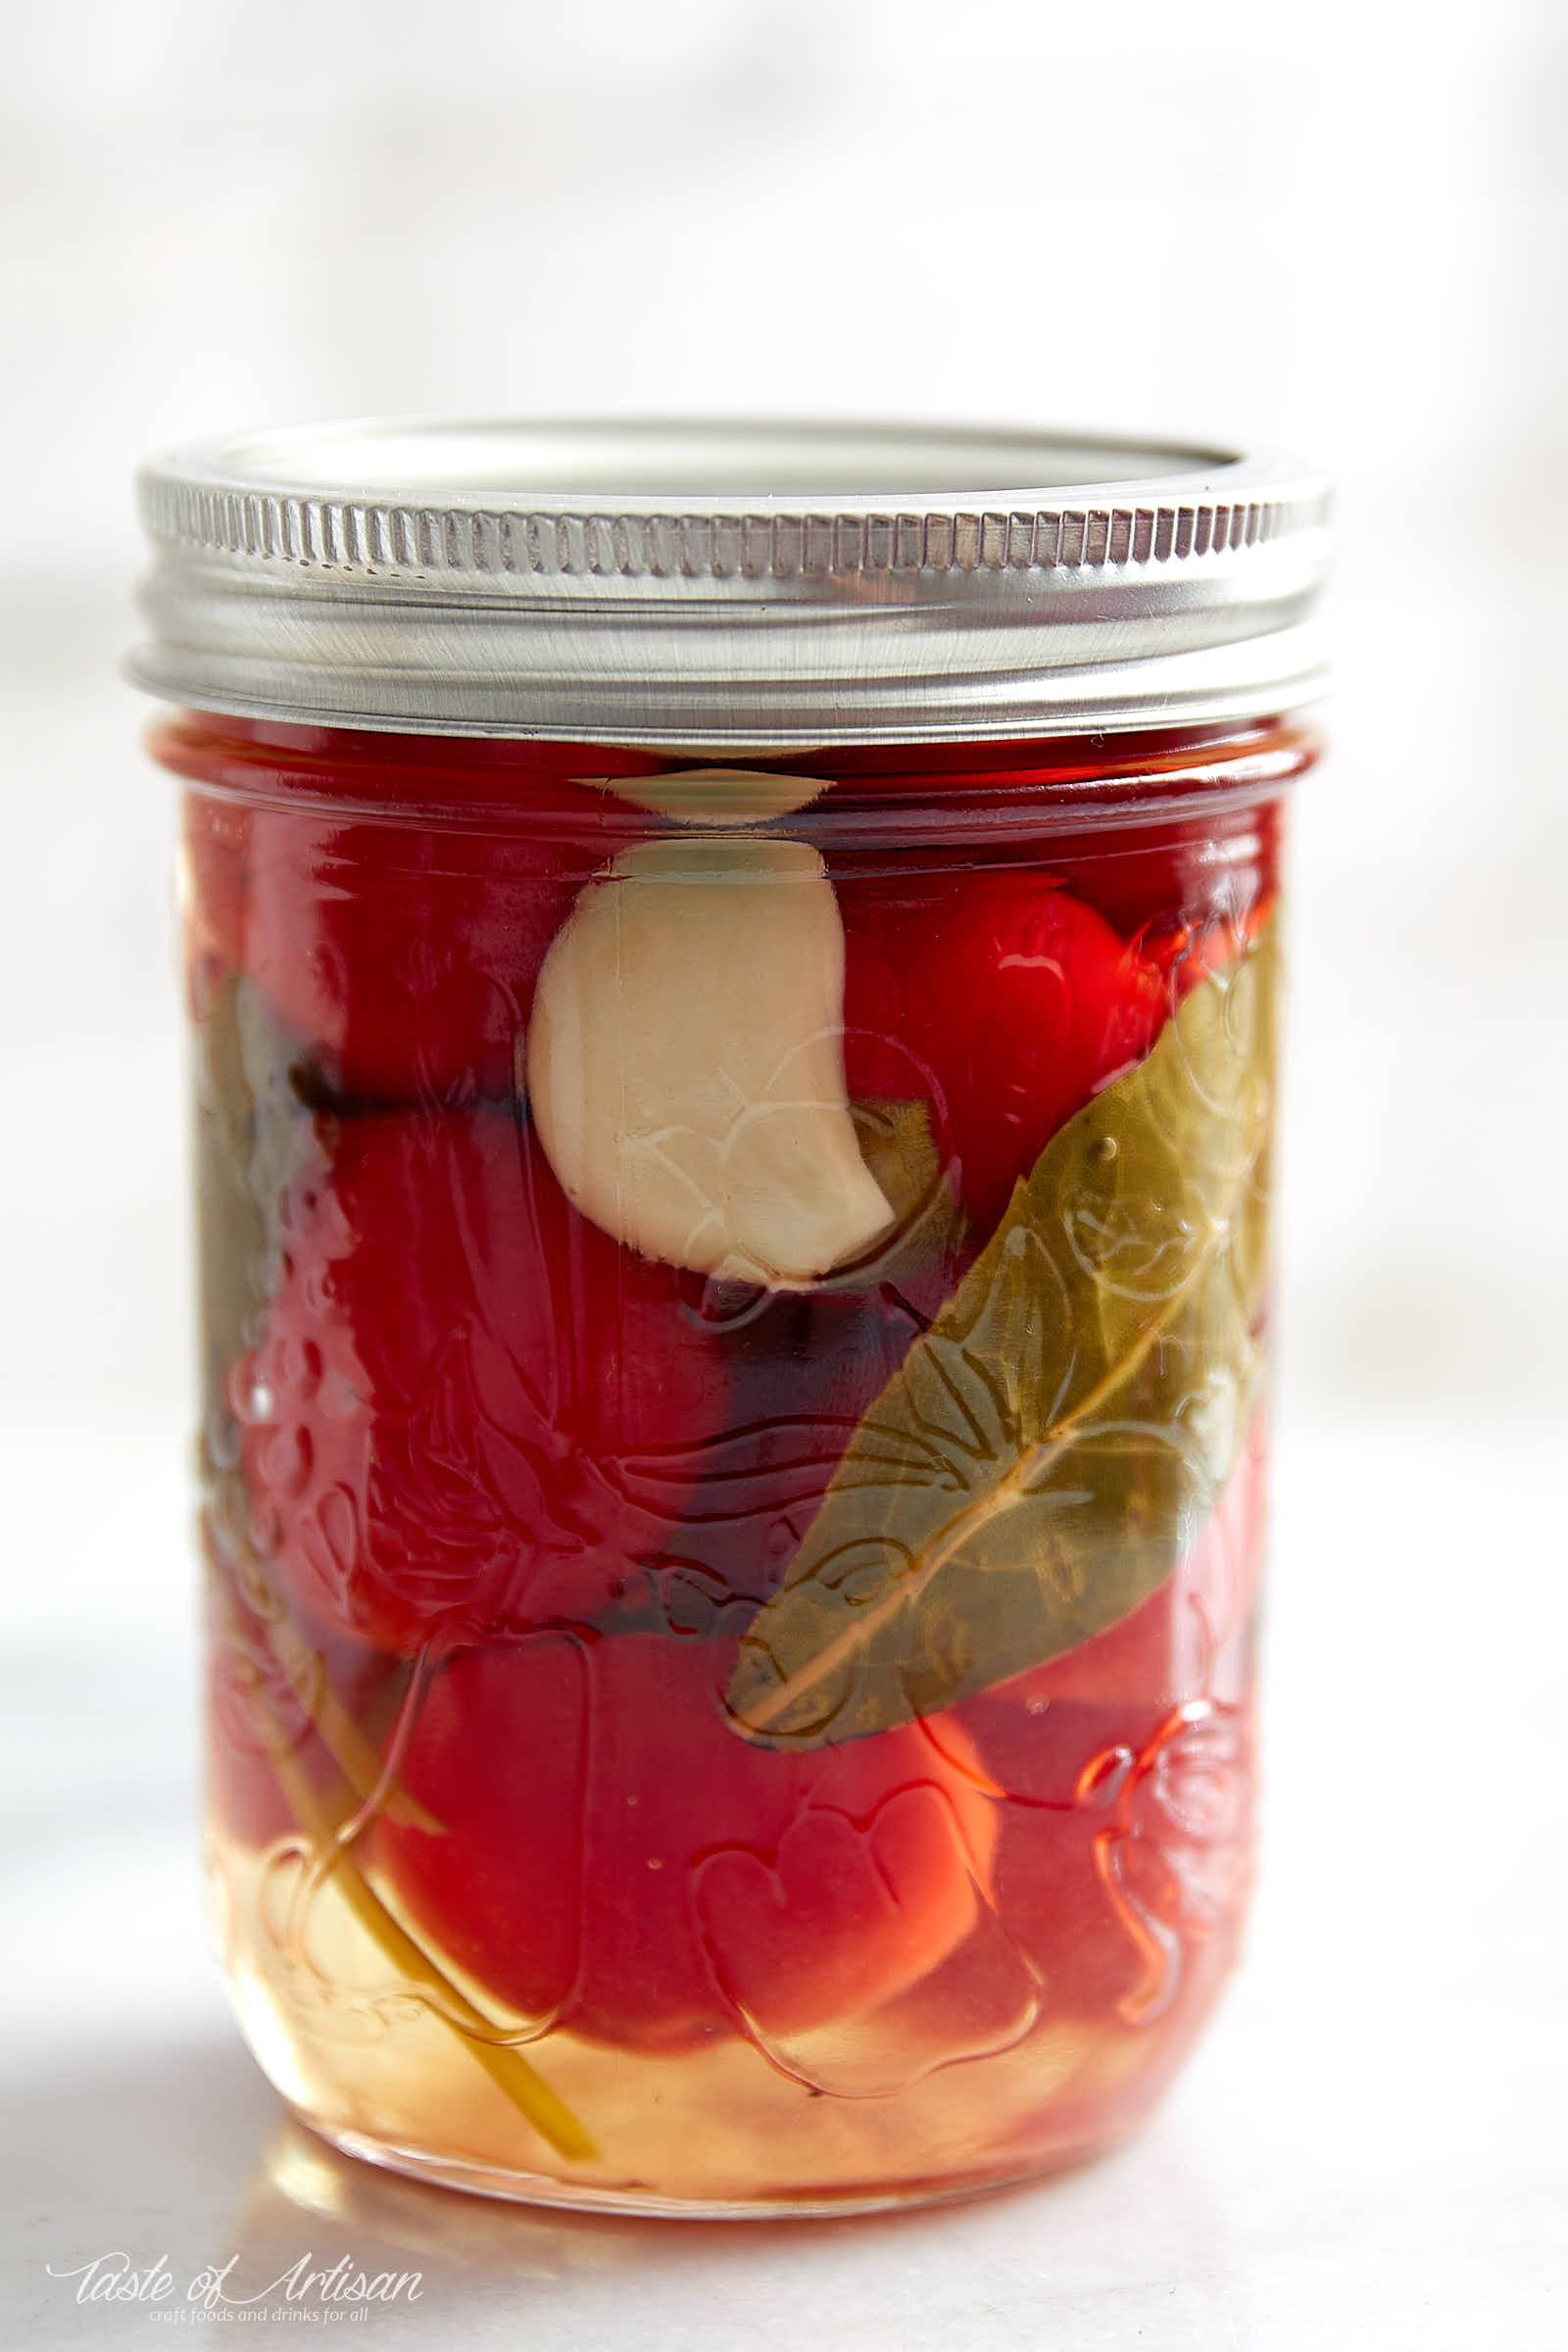 Cherry pepper pickled in a savory, with just a touch of sweetness, pickling liquid. These pickled cherry peppers are excellent with grilled and other meats. | Taste of Artisan